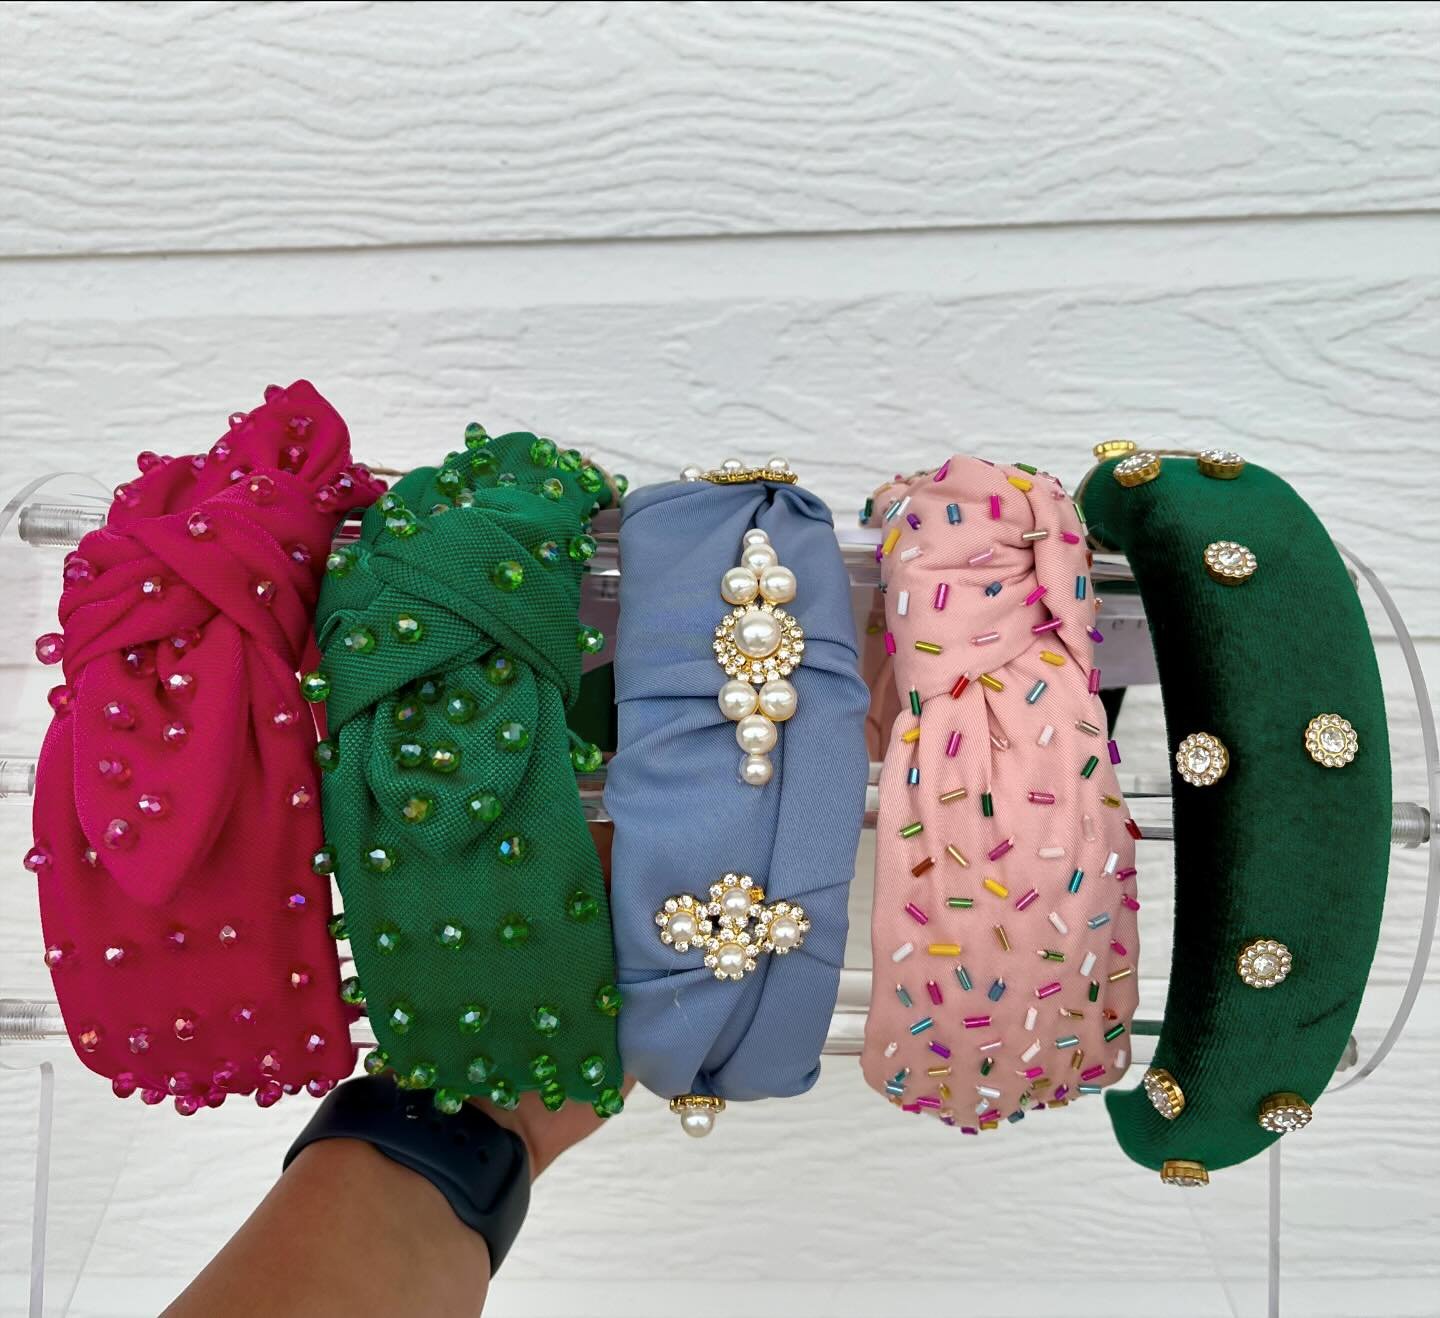 Do you feel like your outfit is missing a little something? Add one of our headbands and your outfit will be flawless! 💗

Shop with us today until 6pm! 🛍️
Or shop with us online 24/7! 🤩

#shoplocal #shopthebeautybar #shopboutiques #headband #fashi